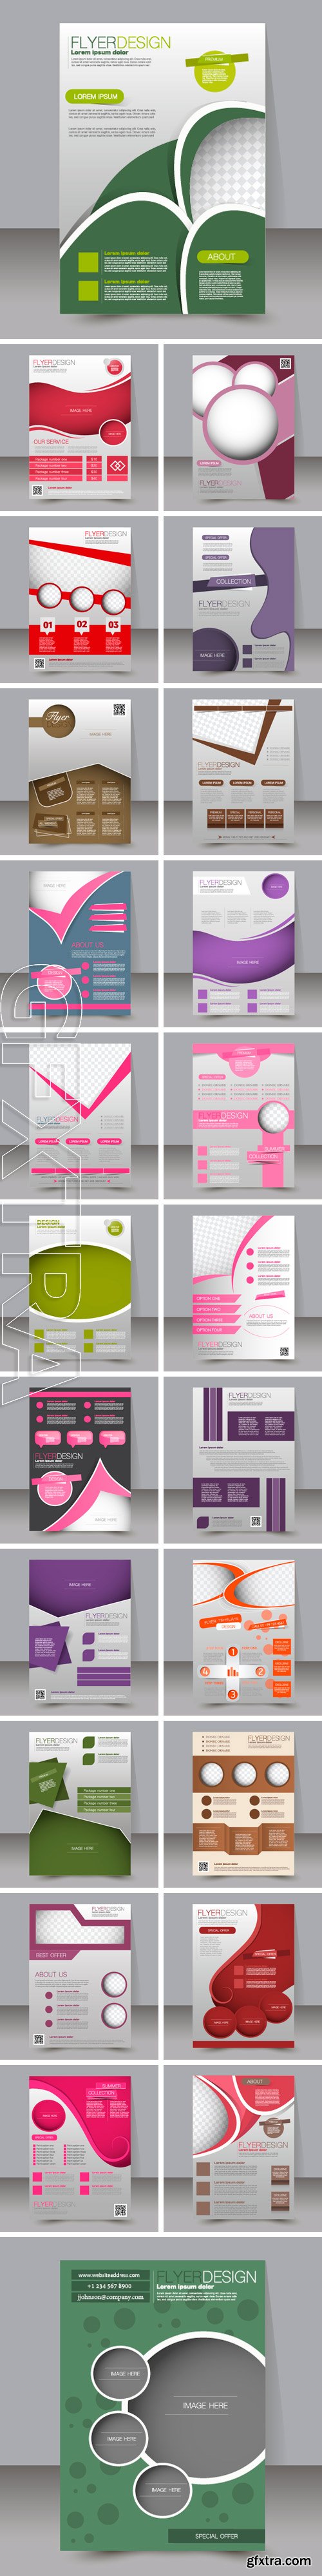 Stock Vectors - Business brochure  template.  Editable A4 poster for design